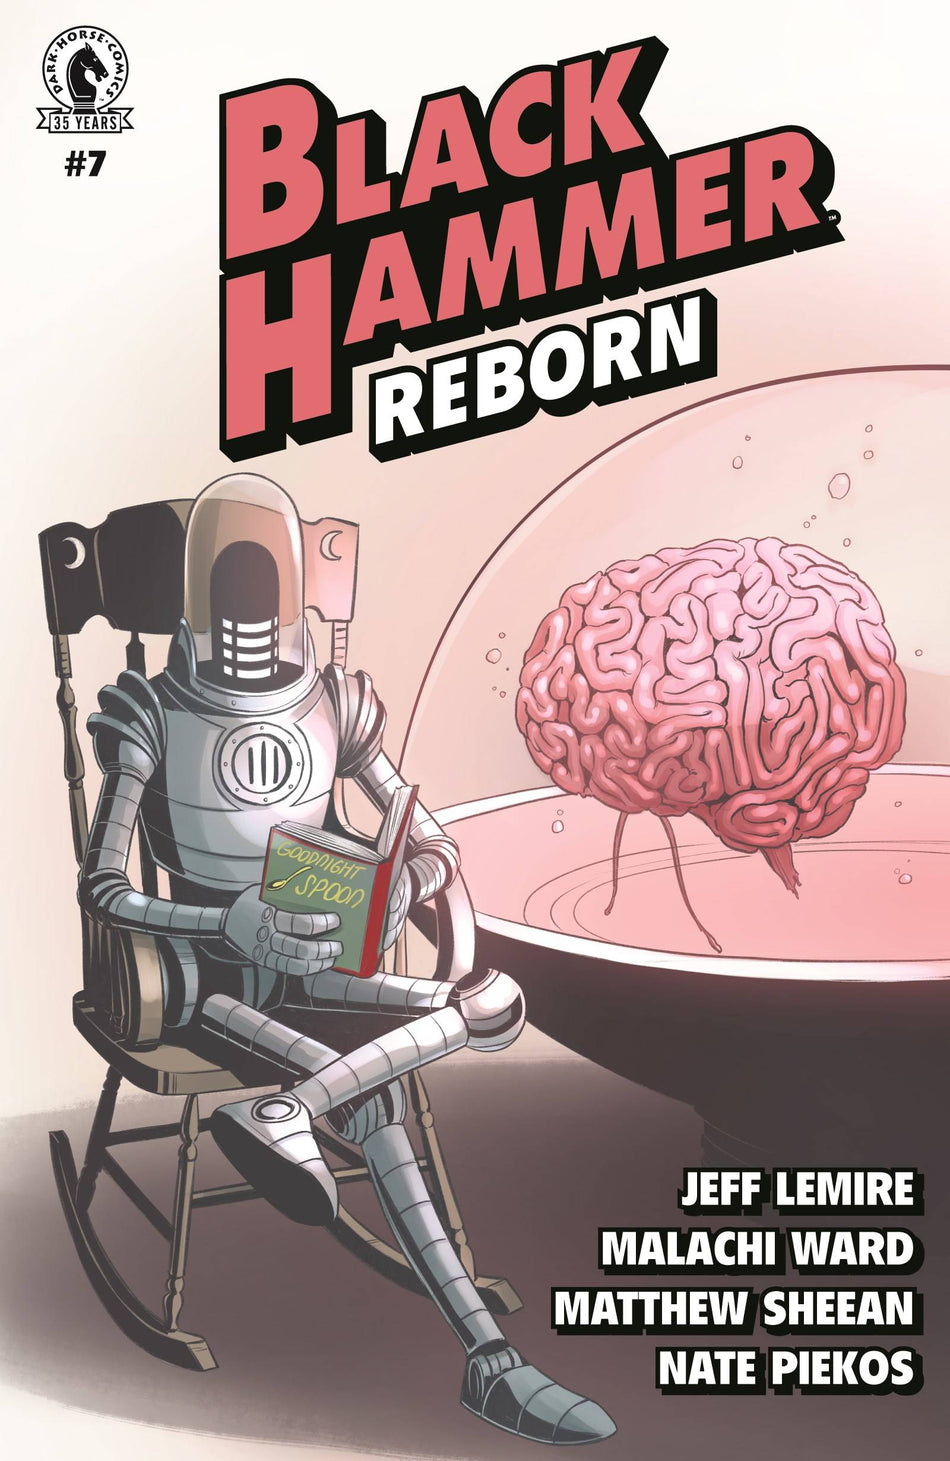 Photo of Black Hammer Reborn Issue 7 (of 12) CVR A Yarsky comic sold by Stronghold Collectibles